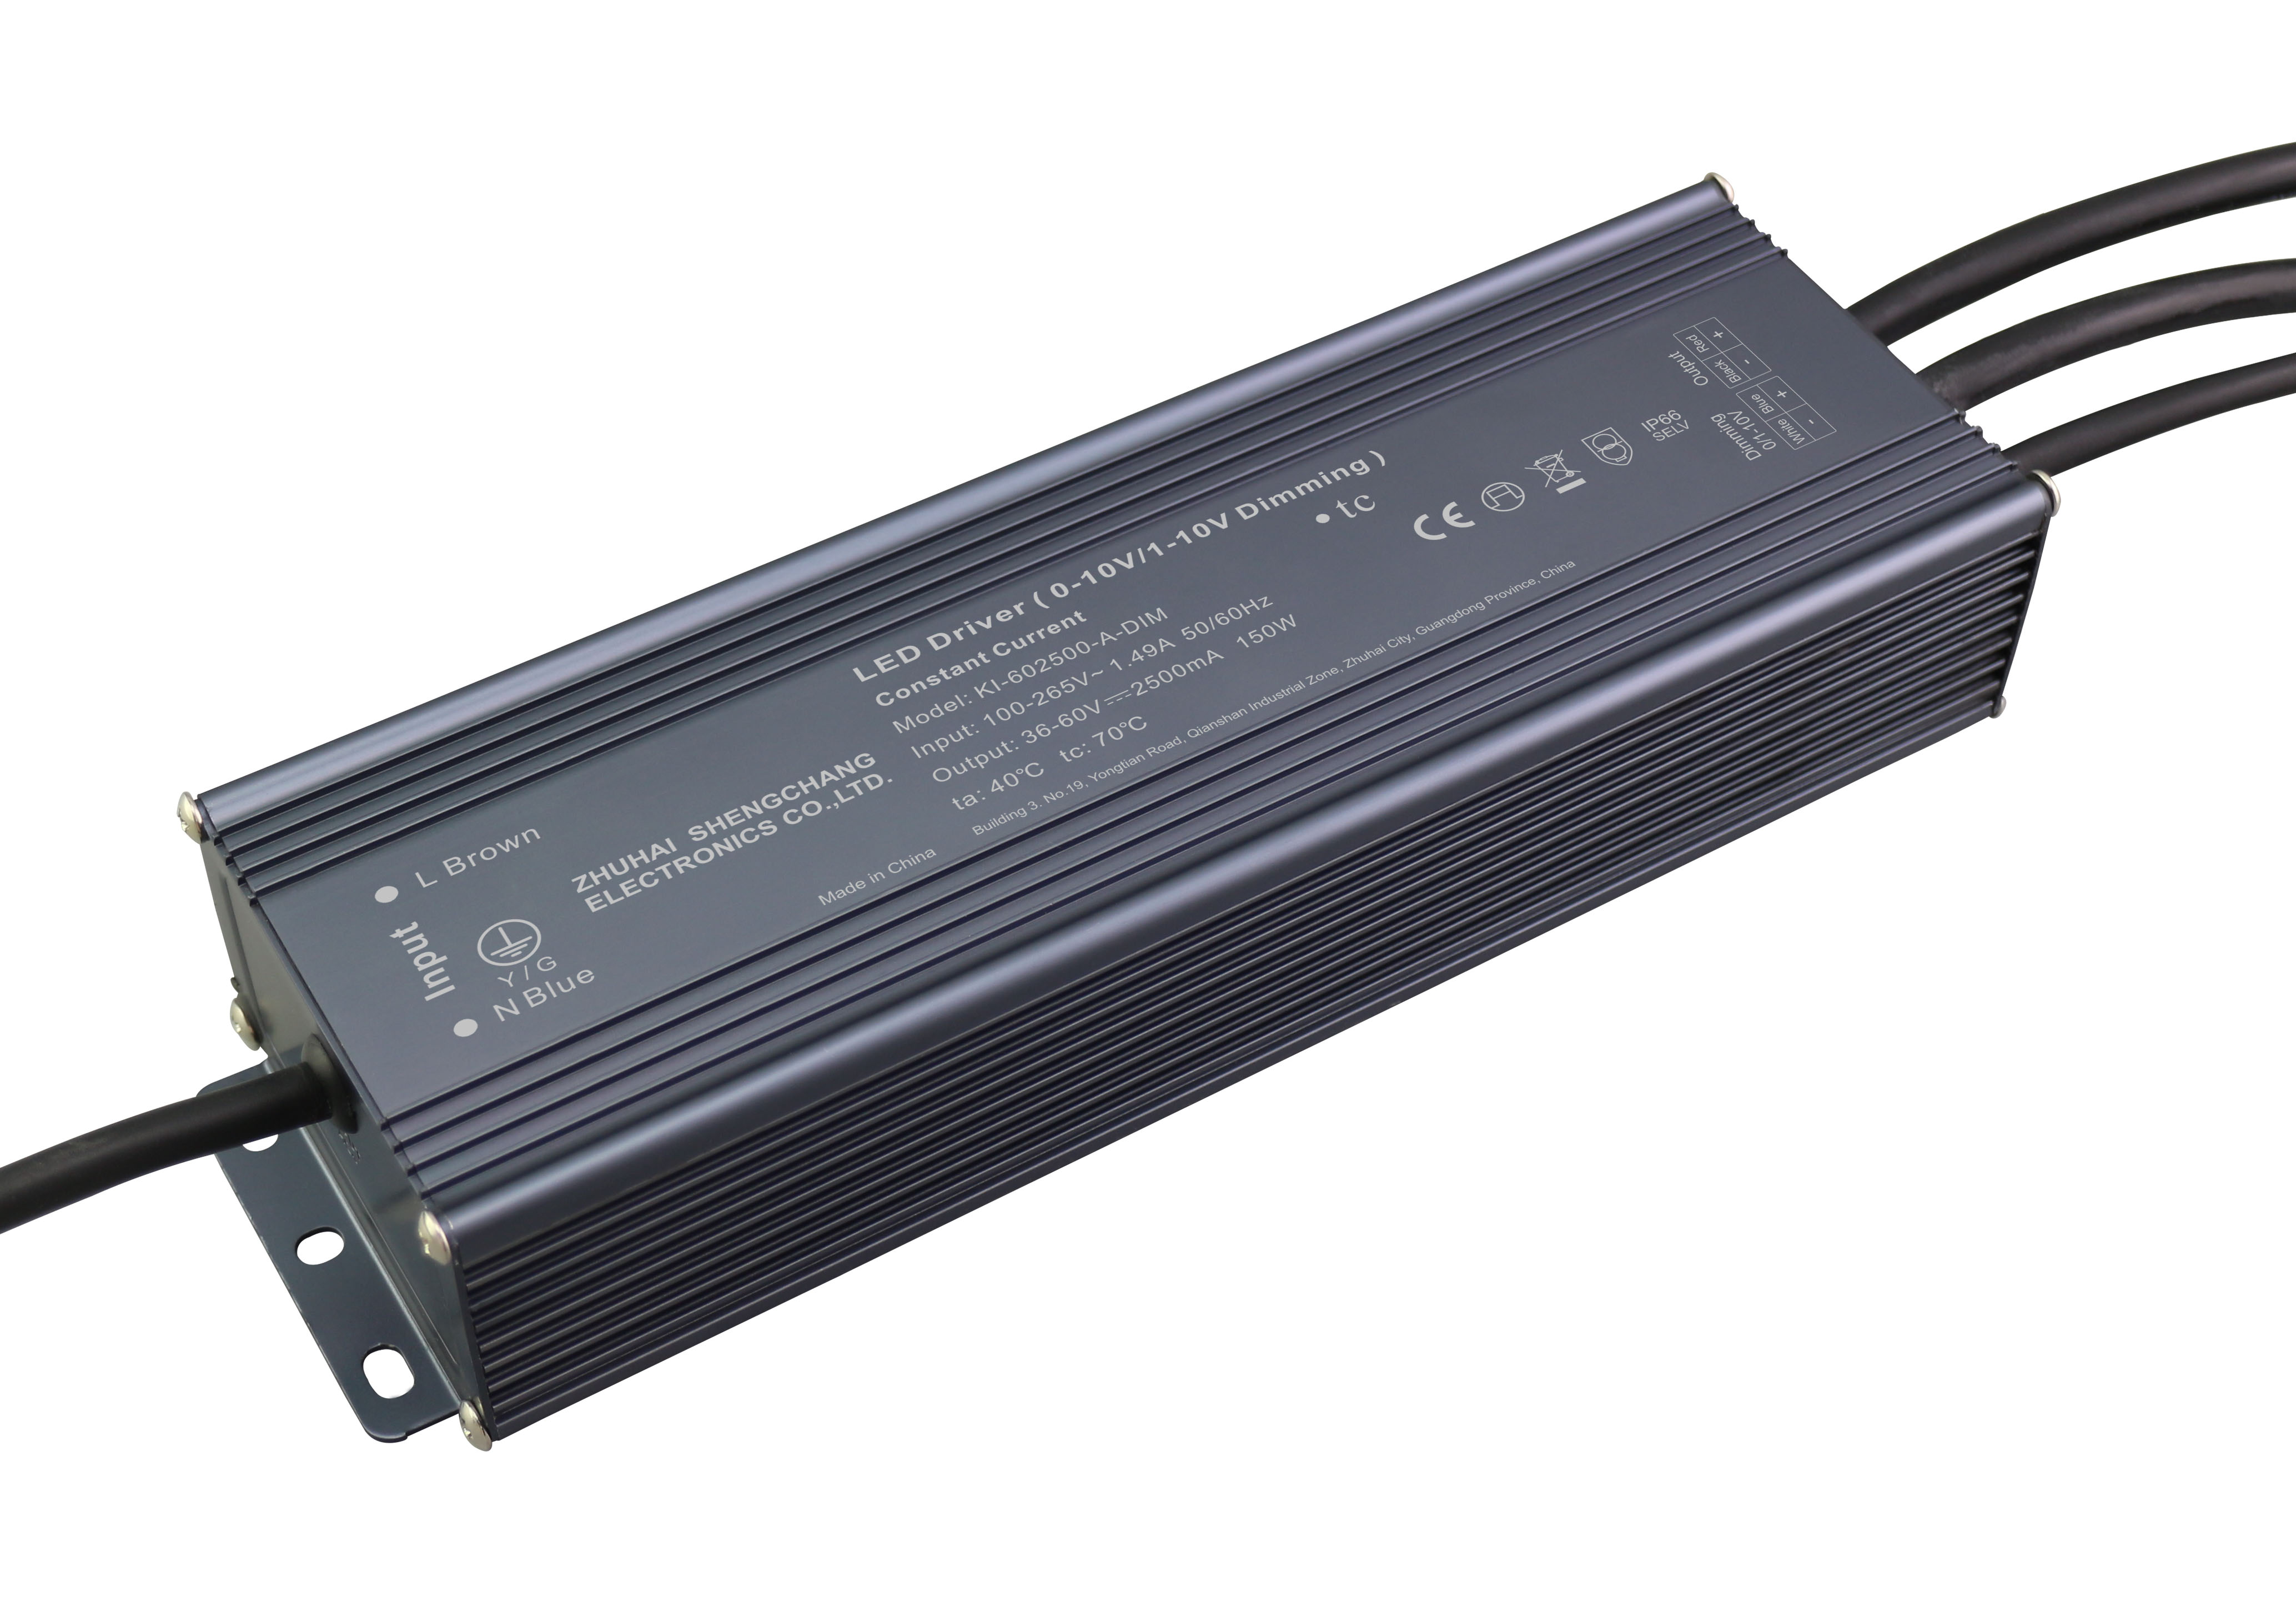 KI-A-DIM Series 150W 0/1-10V constant current dimmable LED driver